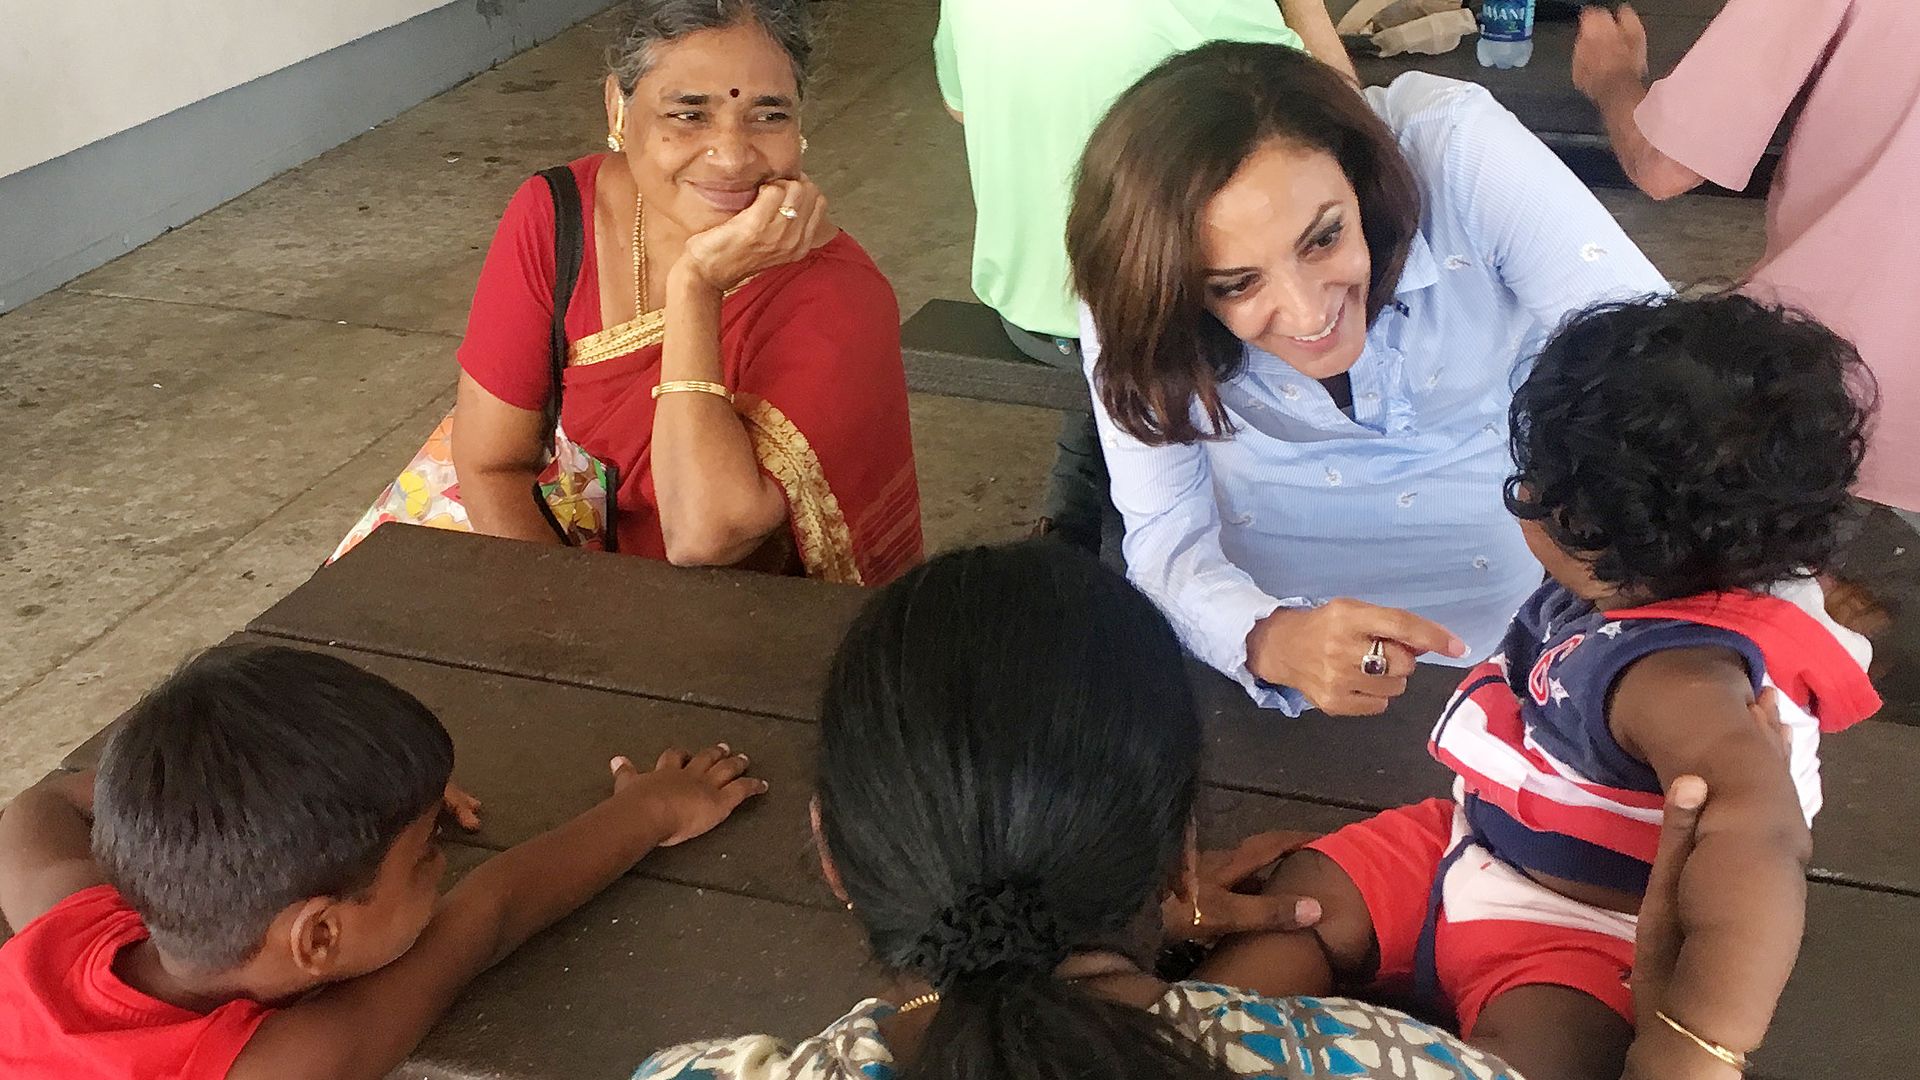 Katie Arrington chats with children and a mother in South Carolina